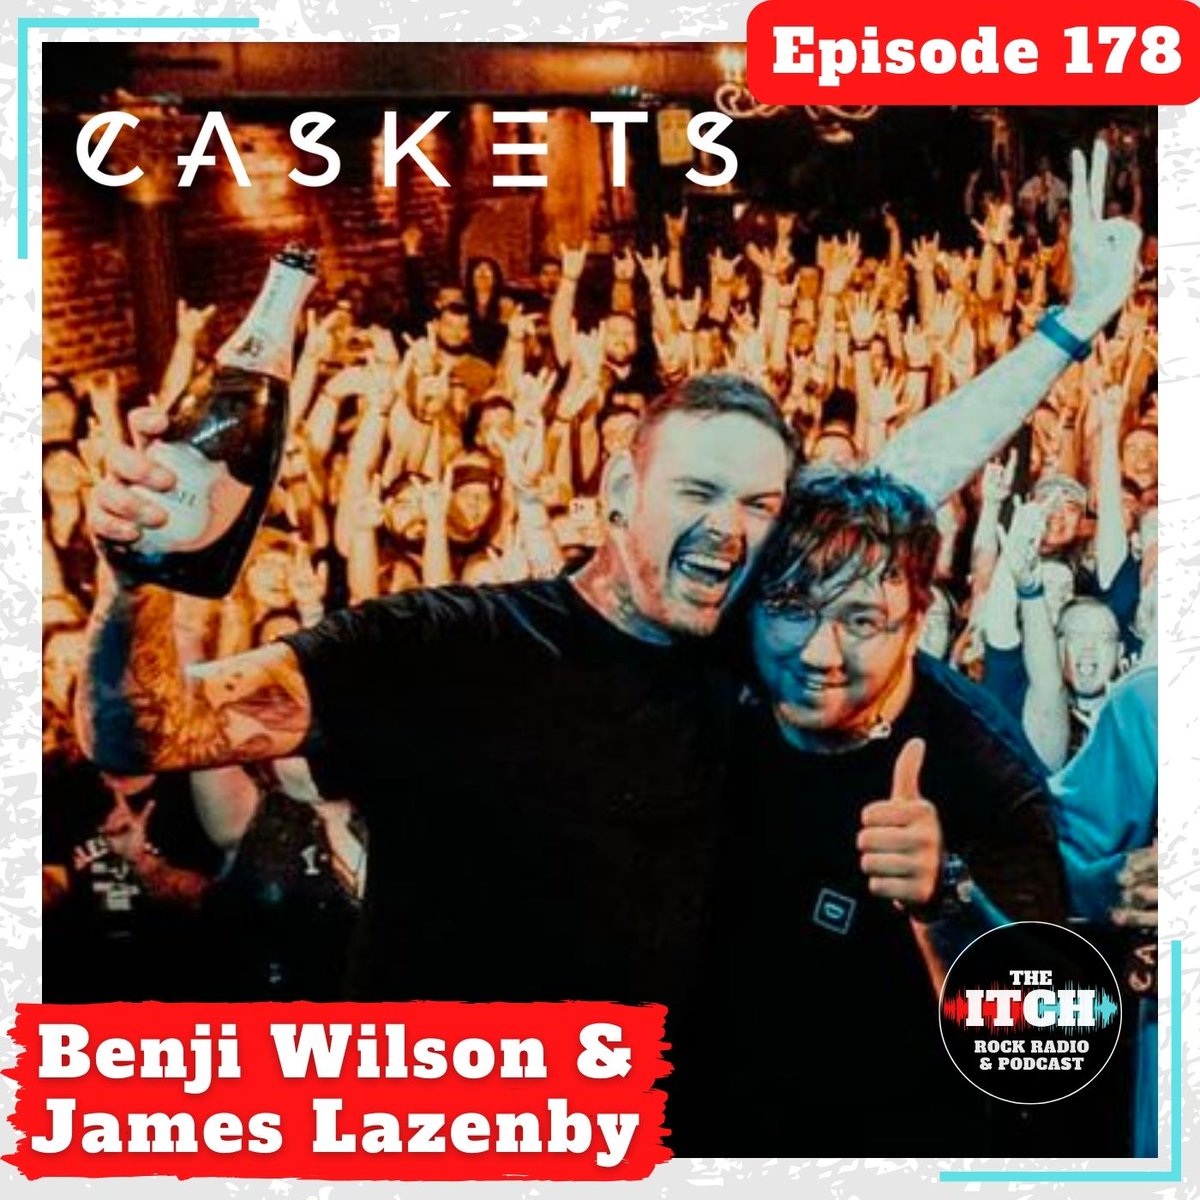 New episode! Charming Leeds lads Benji & James of @Caskets_band join us for a delightful discussion about their new album Reflections, favorite cities from their US tour, and the key to success on a human level in an industry that can be cutthroat. Enjoy: itchrocks.com/178